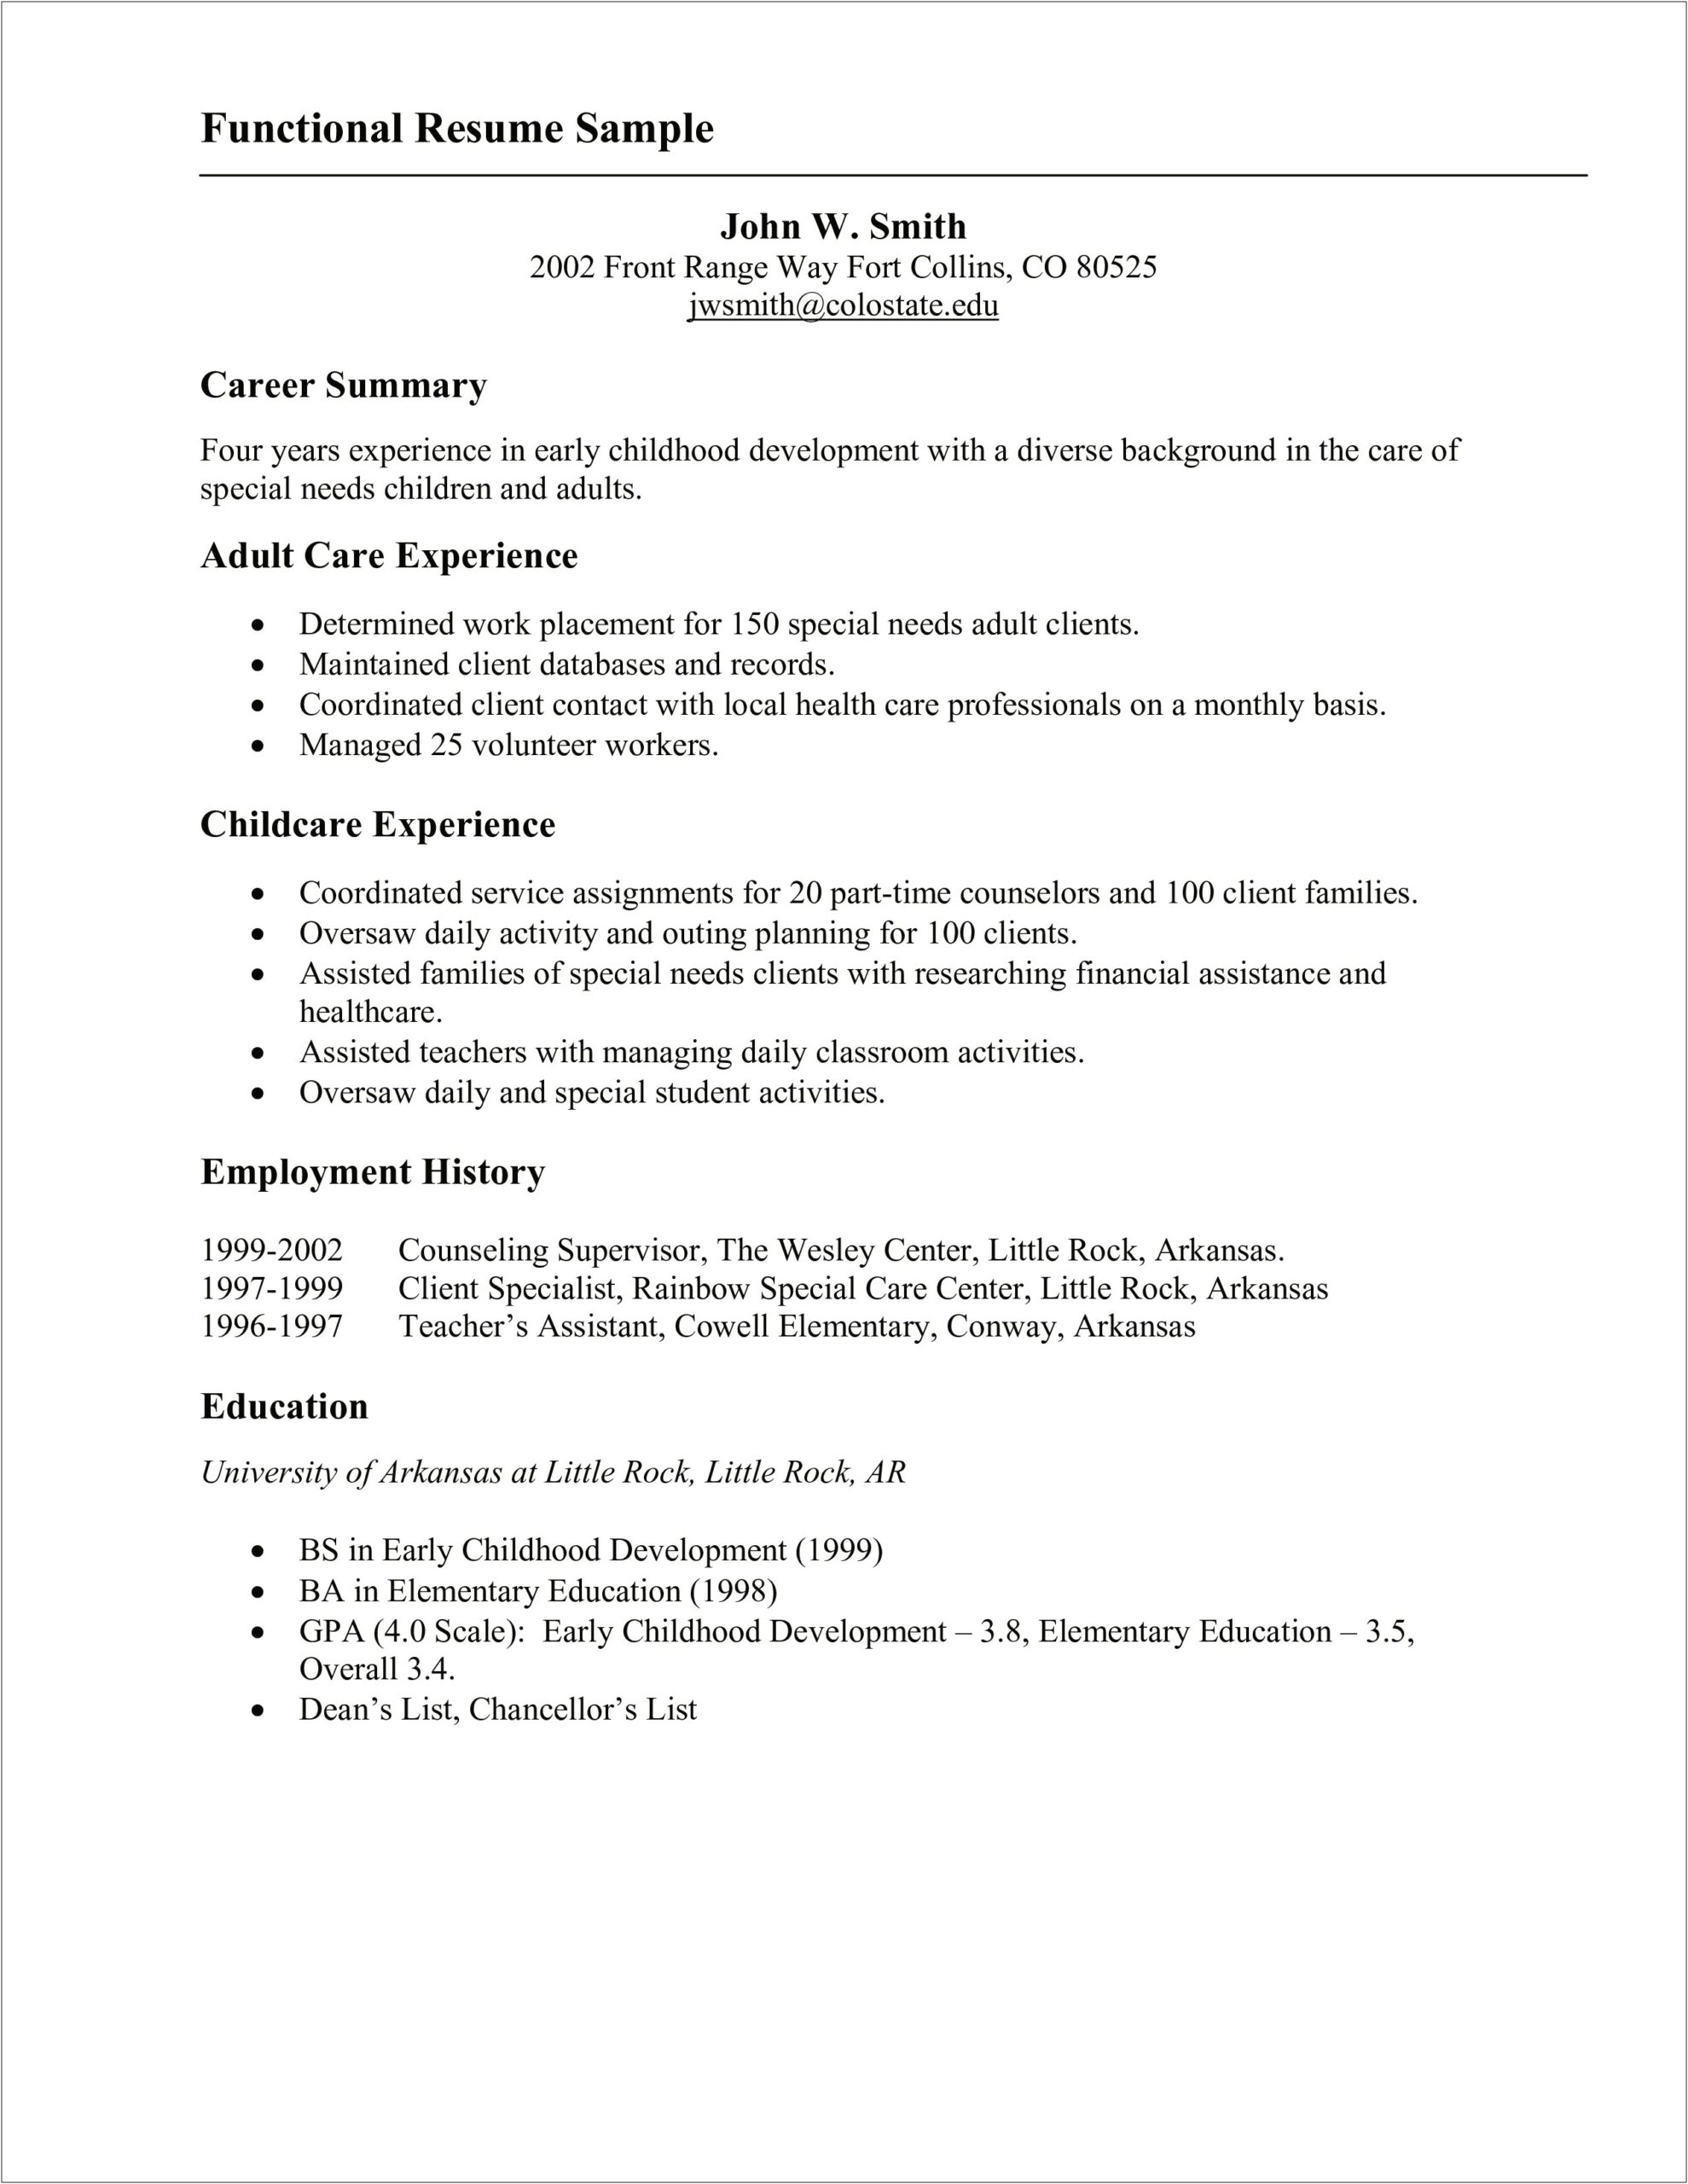 Examples Of Great Functional Resume S